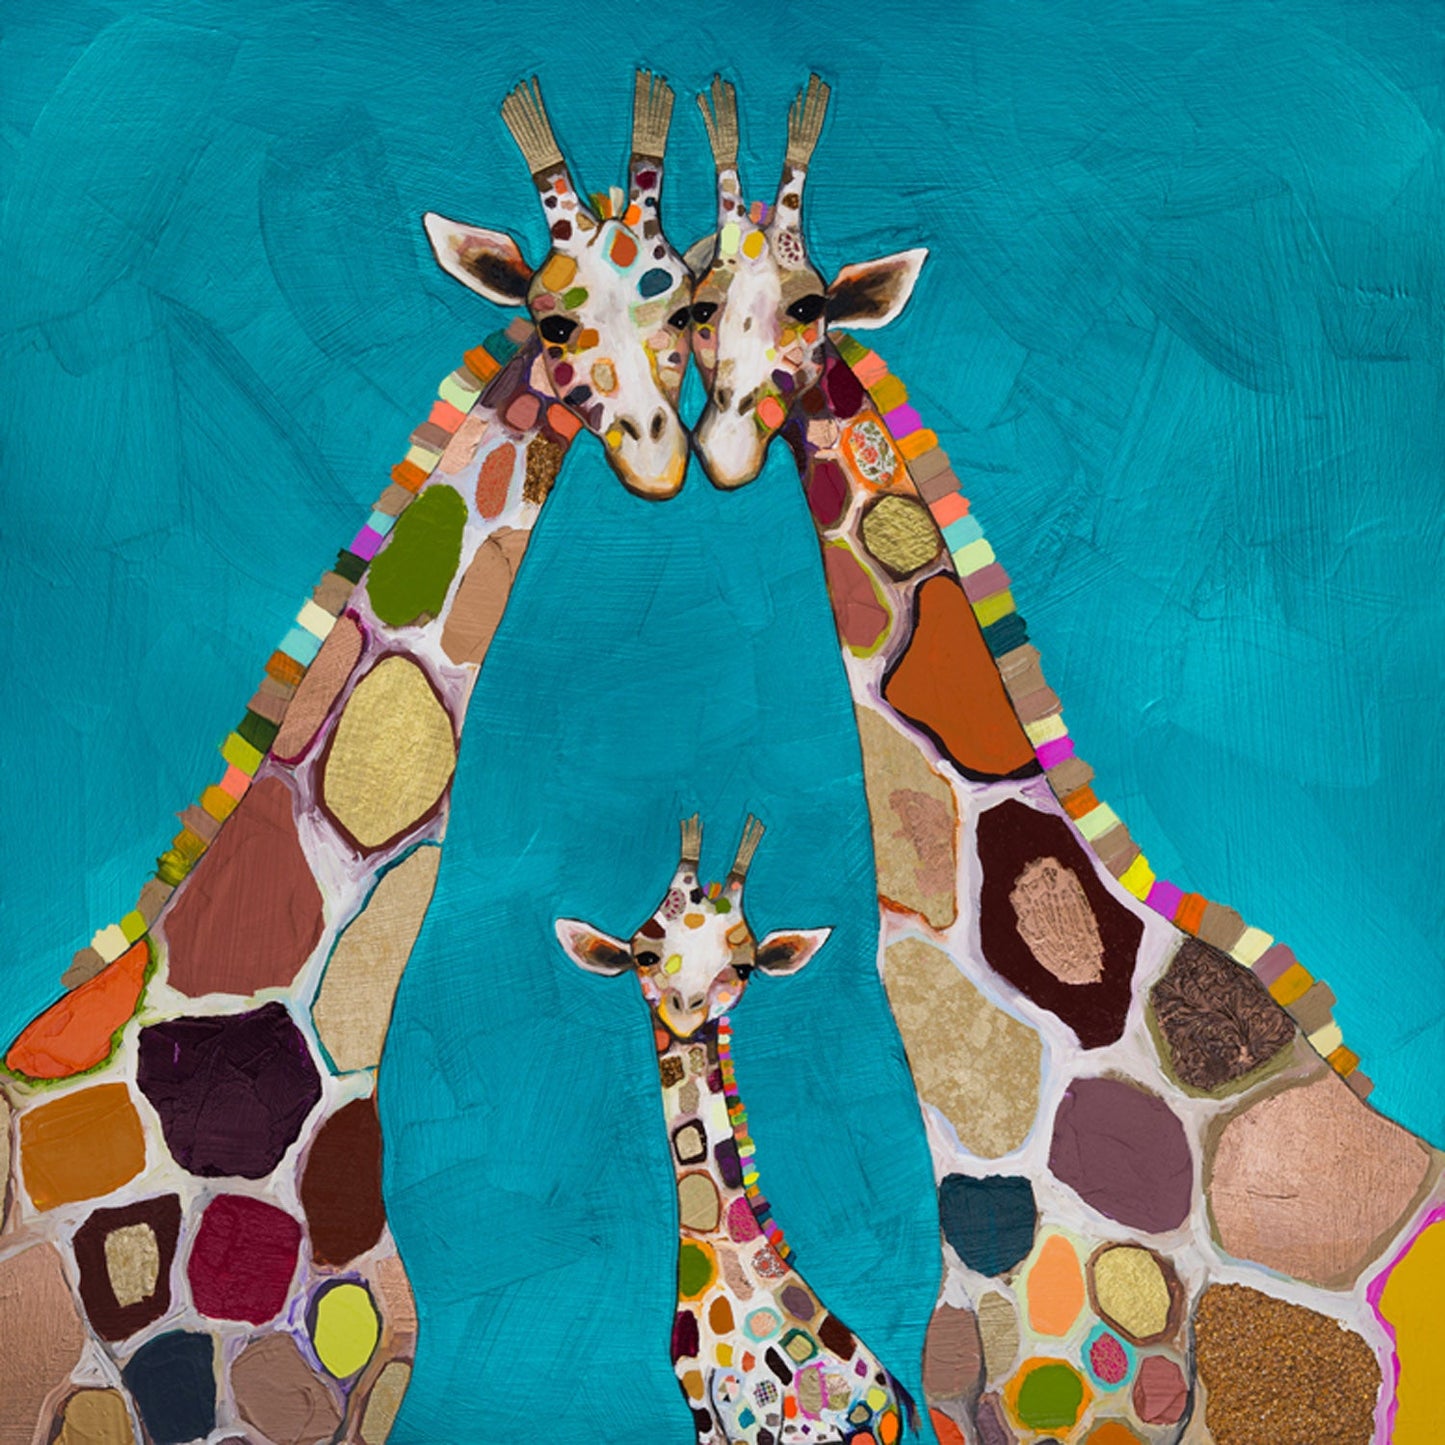 Giraffe Family In Turquoise Canvas Wall Art